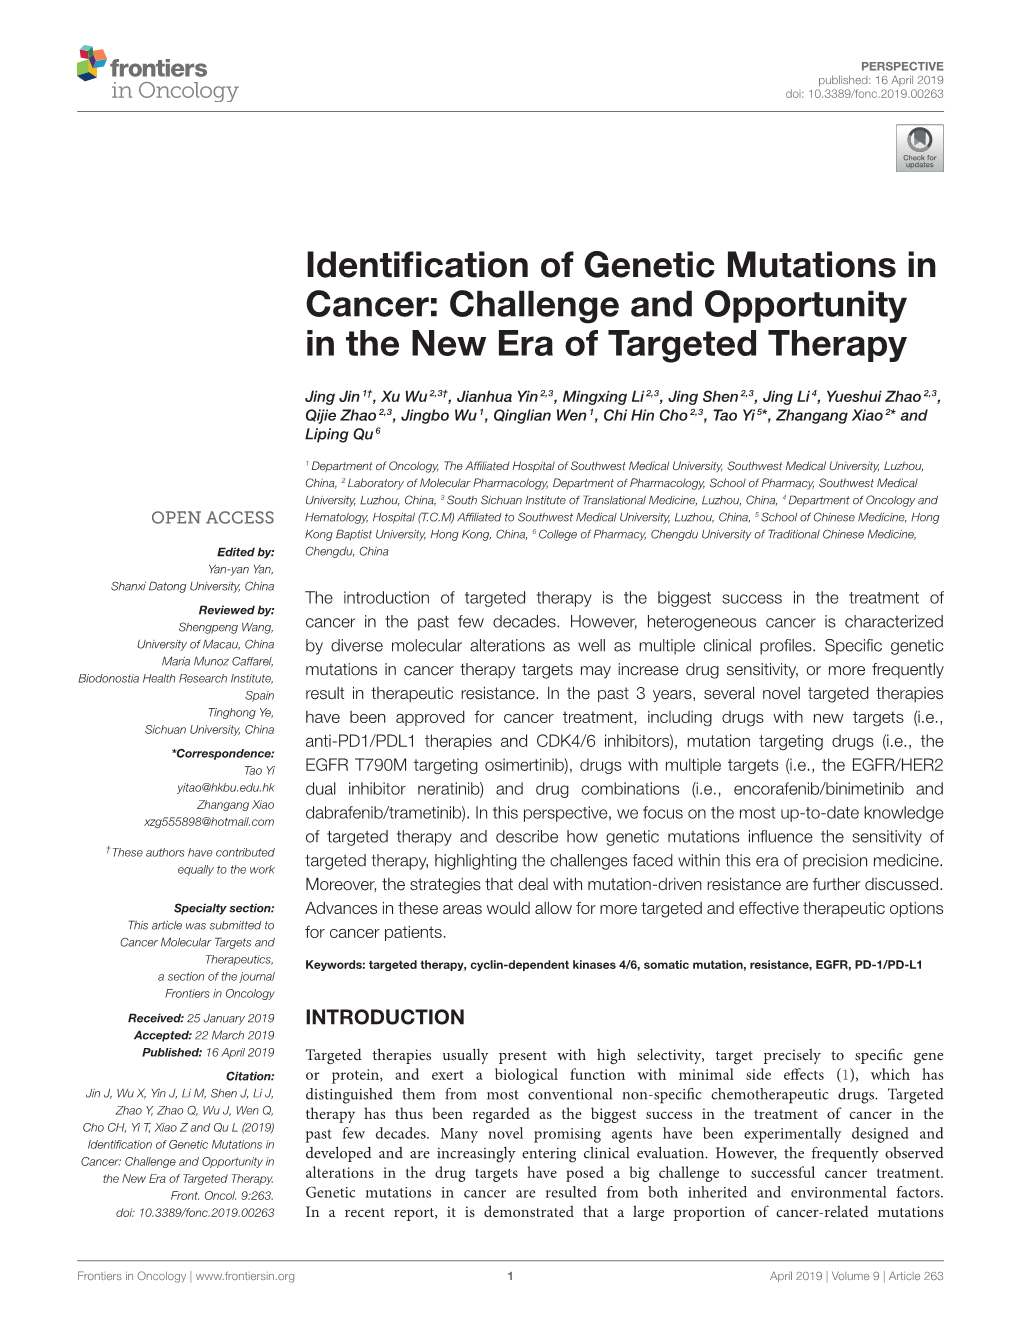 Identification of Genetic Mutations in Cancer: Challenge and Opportunity in the New Era of Targeted Therapy